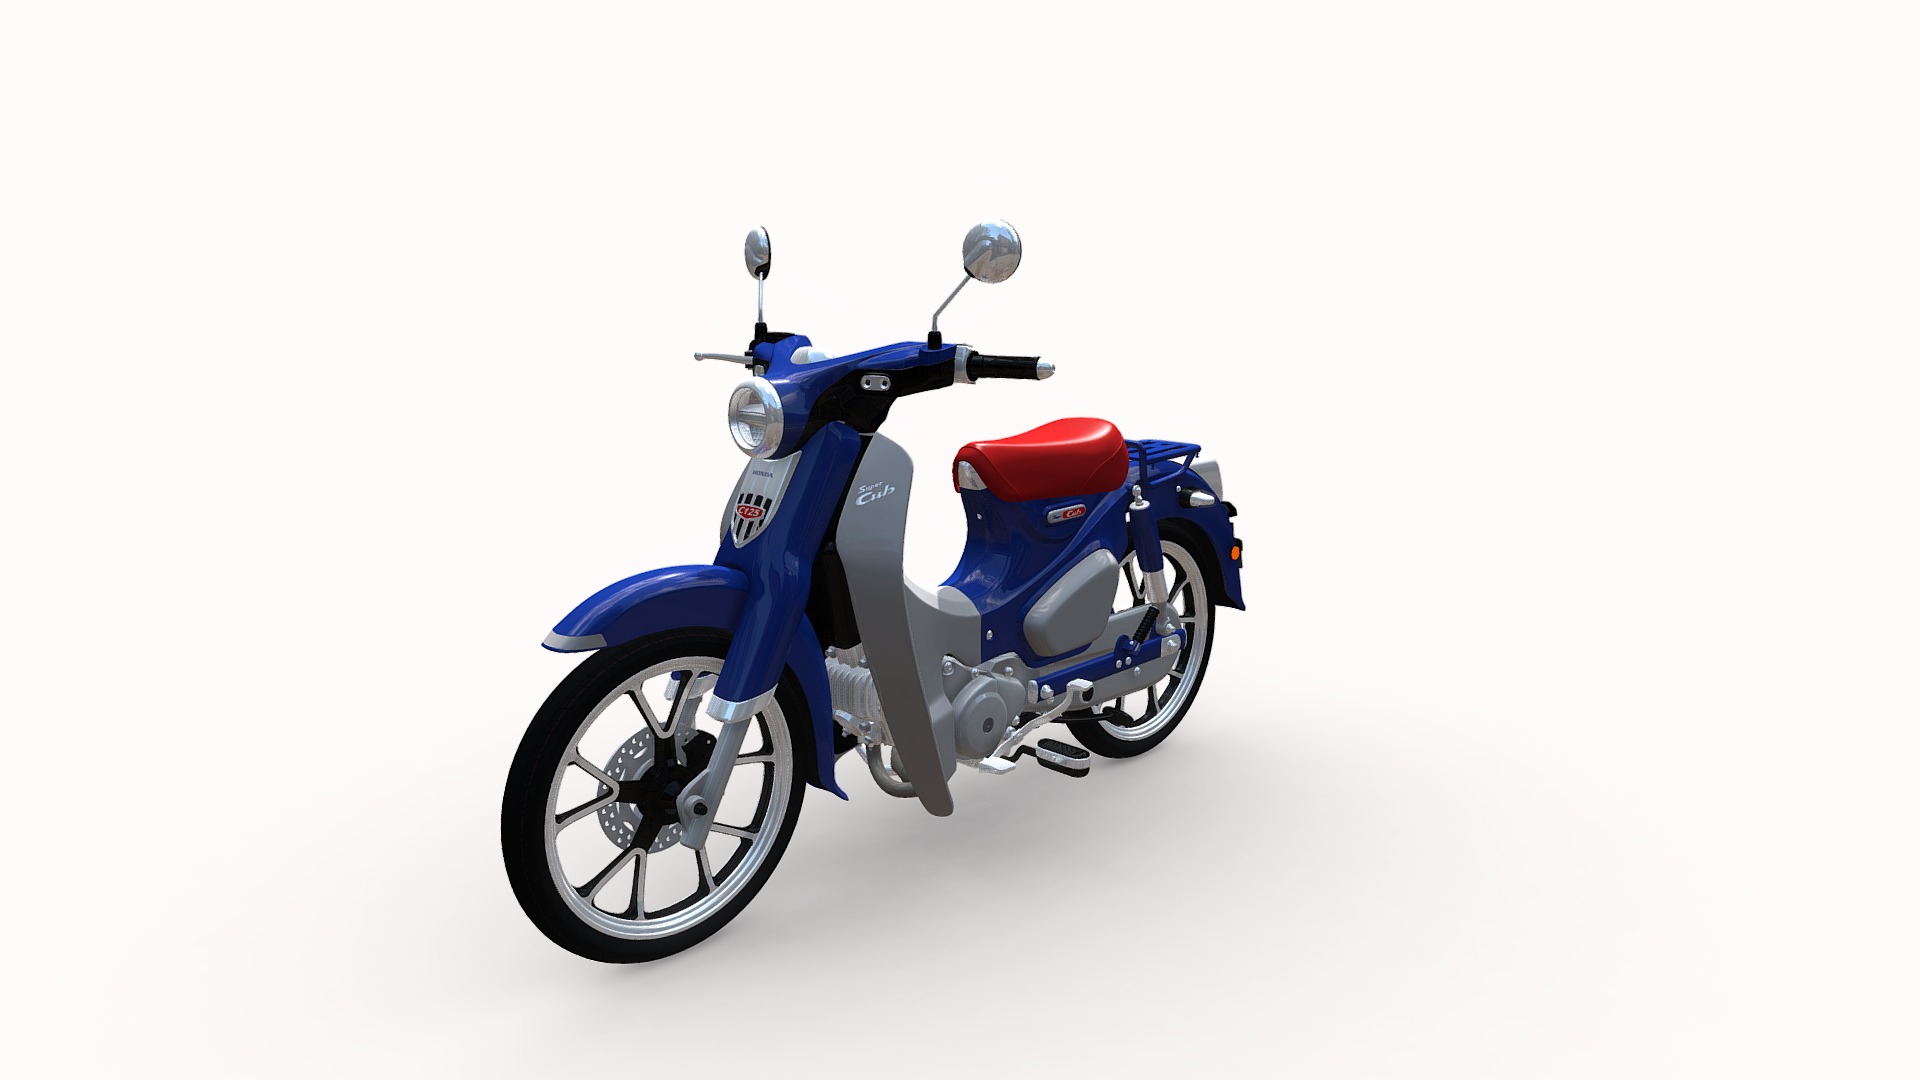 3D model Honda Super Cub C125 2019 - This is a 3D model of the Honda Super Cub C125 2019. The 3D model is about a blue and red motorcycle.